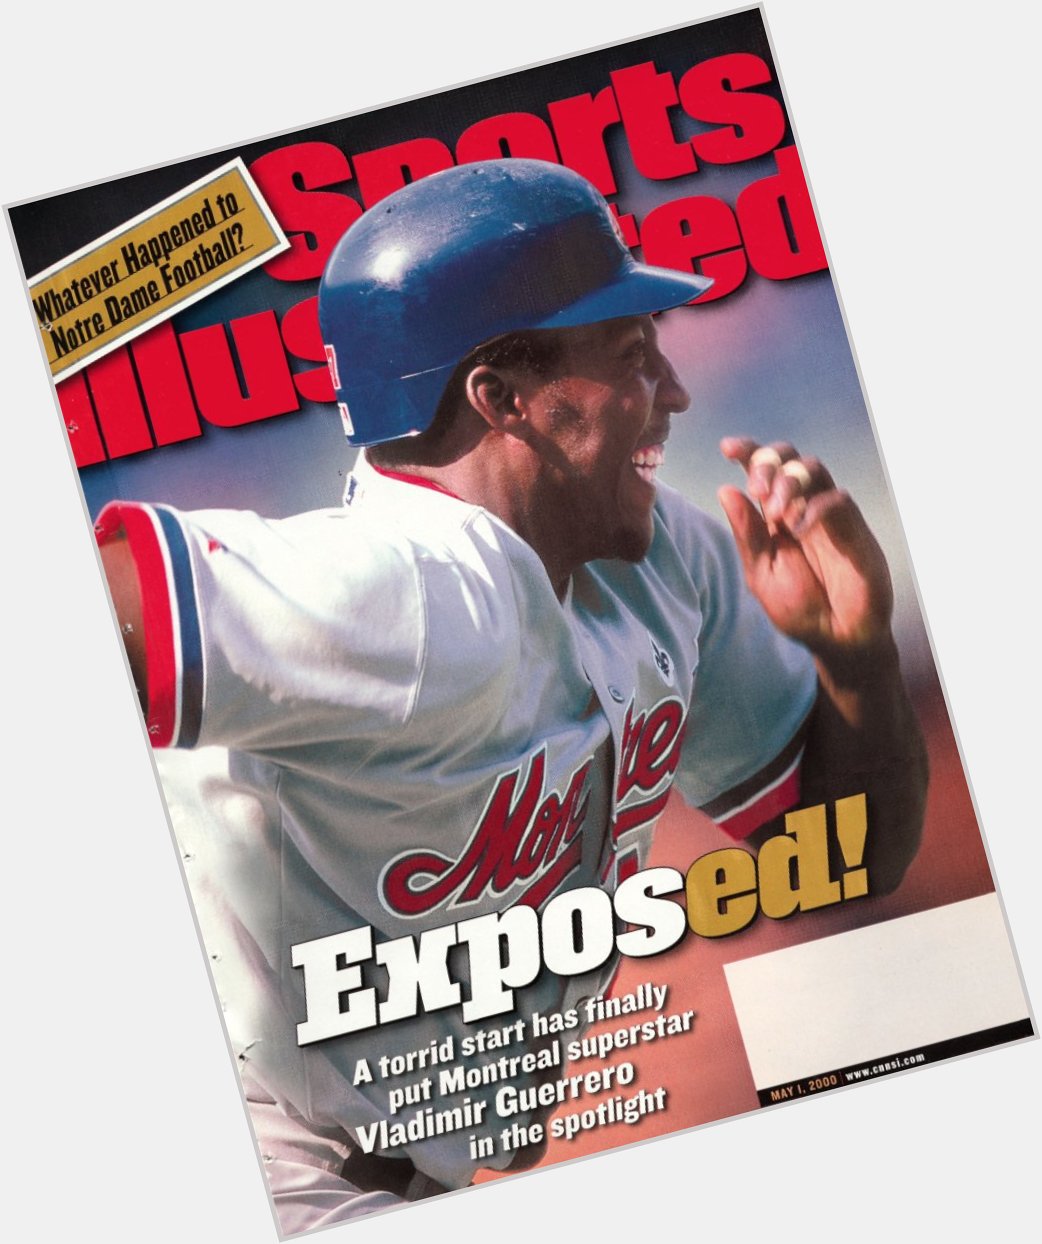 Happy birthday to one of baseball s newest Hall of Famers, Vladimir Guerrero!  